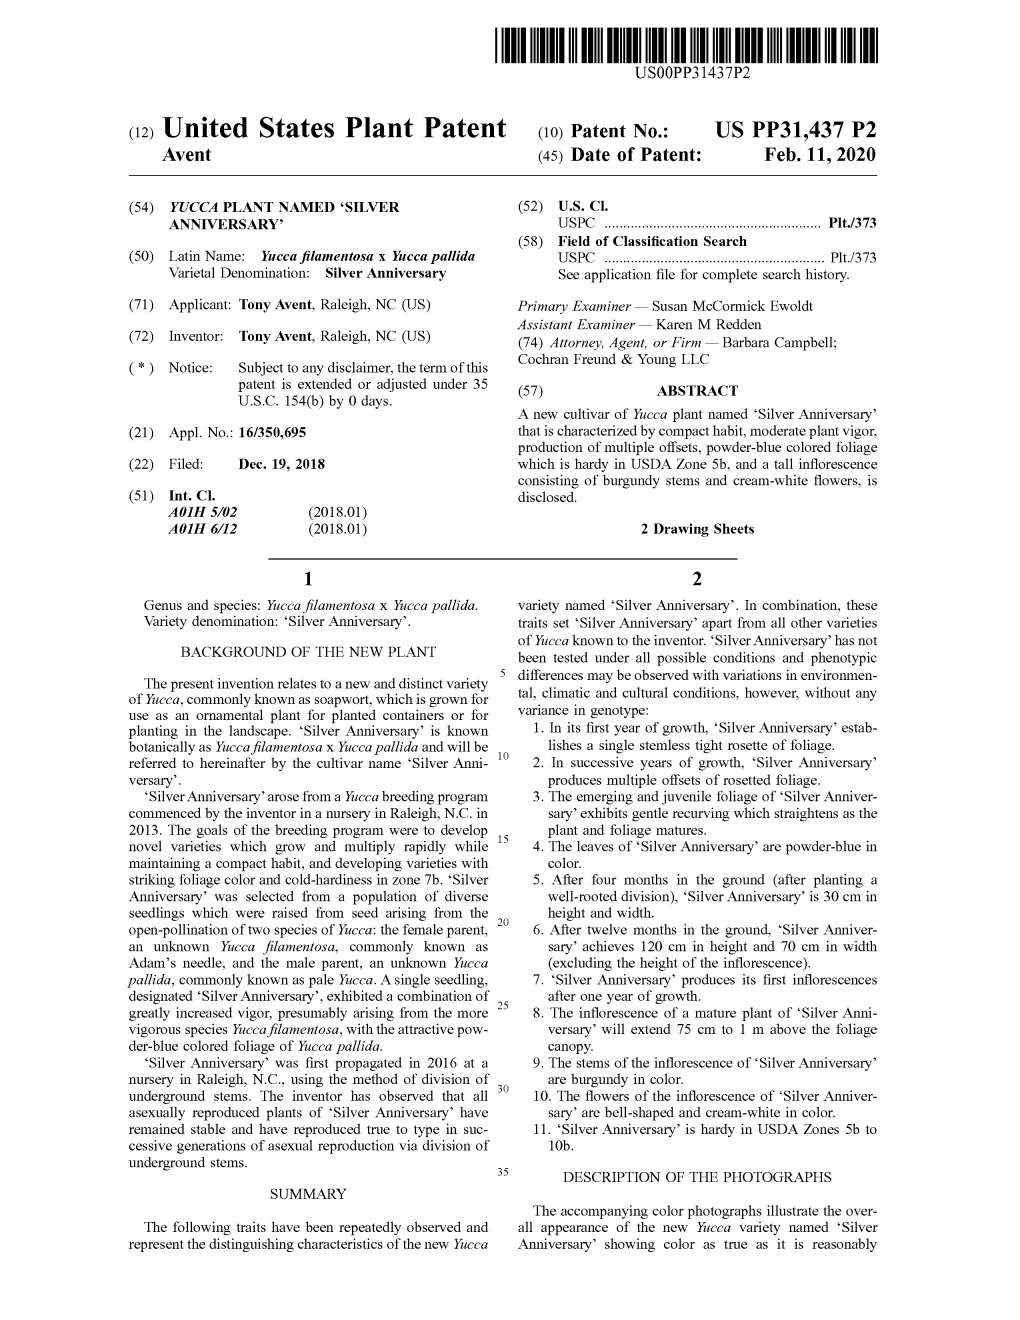 ( 12 ) United States Plant Patent ( 10 ) Patent No.: US PP31,437 P2 Avent (45 ) Date of Patent: Feb